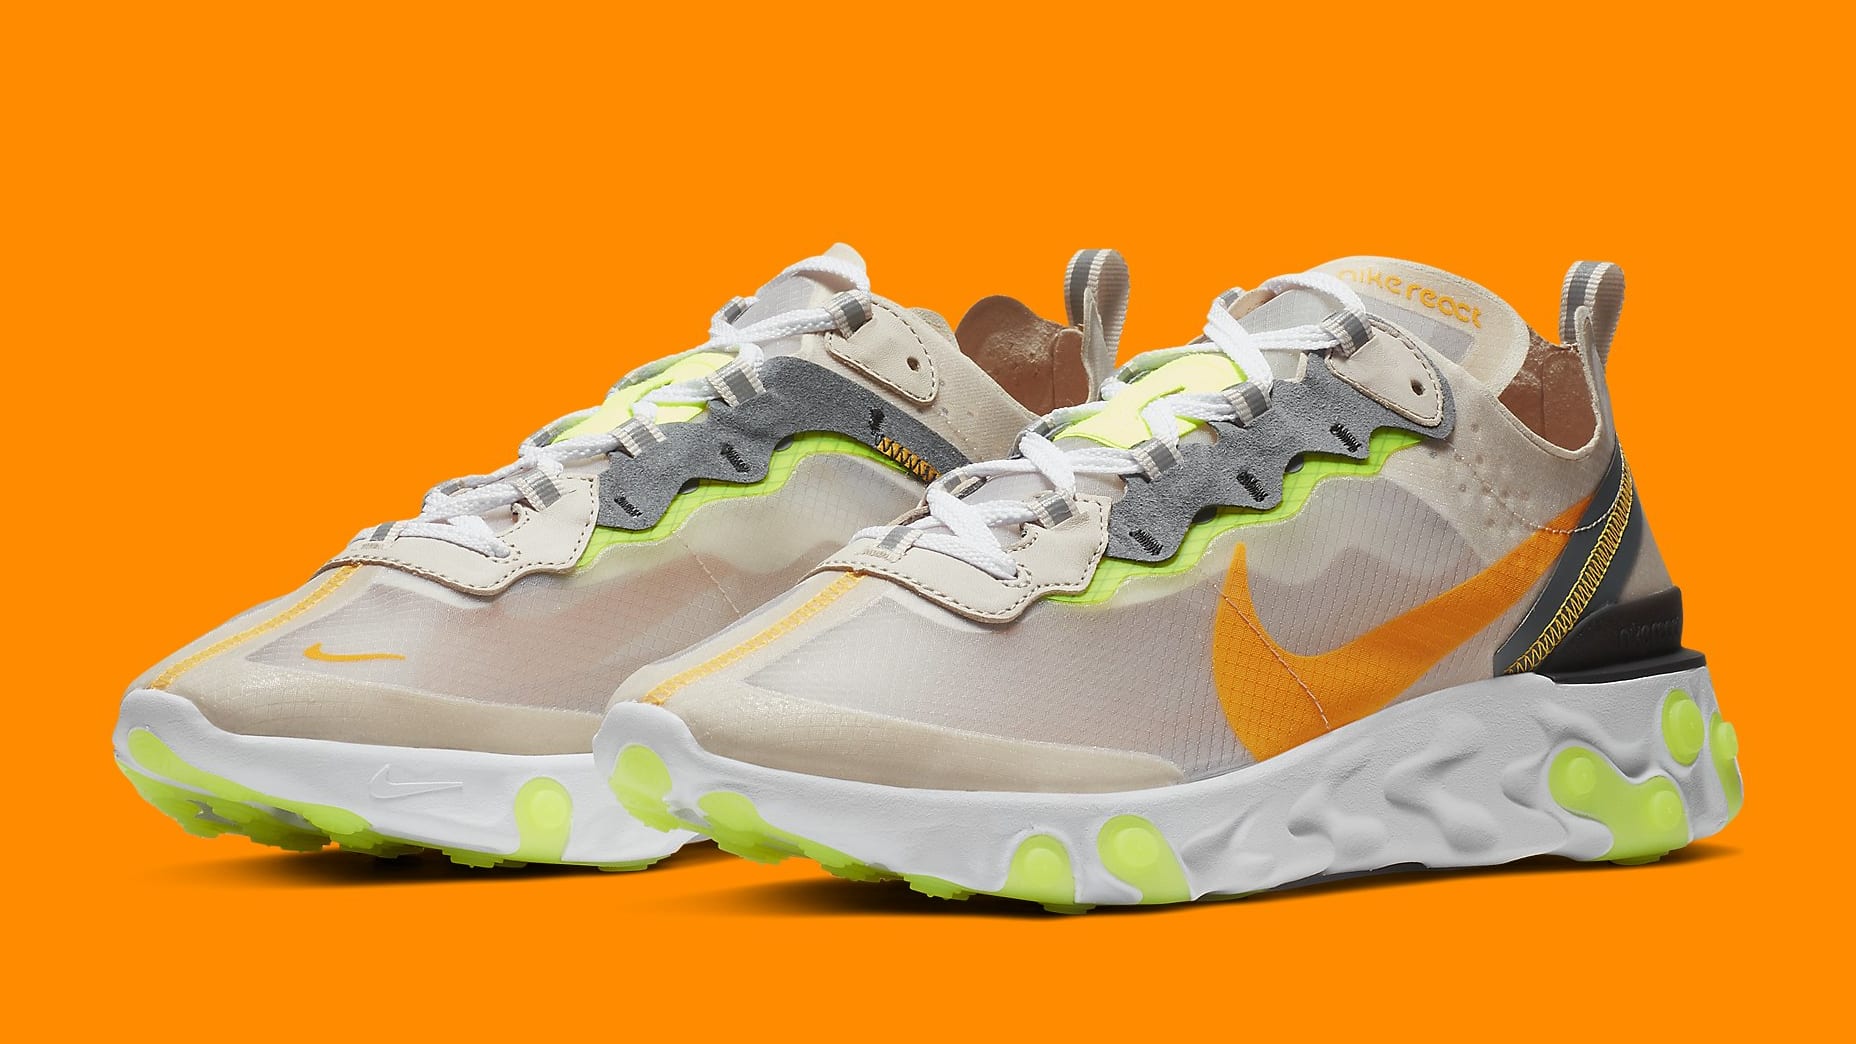 nike-react-element-87-touch-of-lime-release-date-aq1090-101-pair